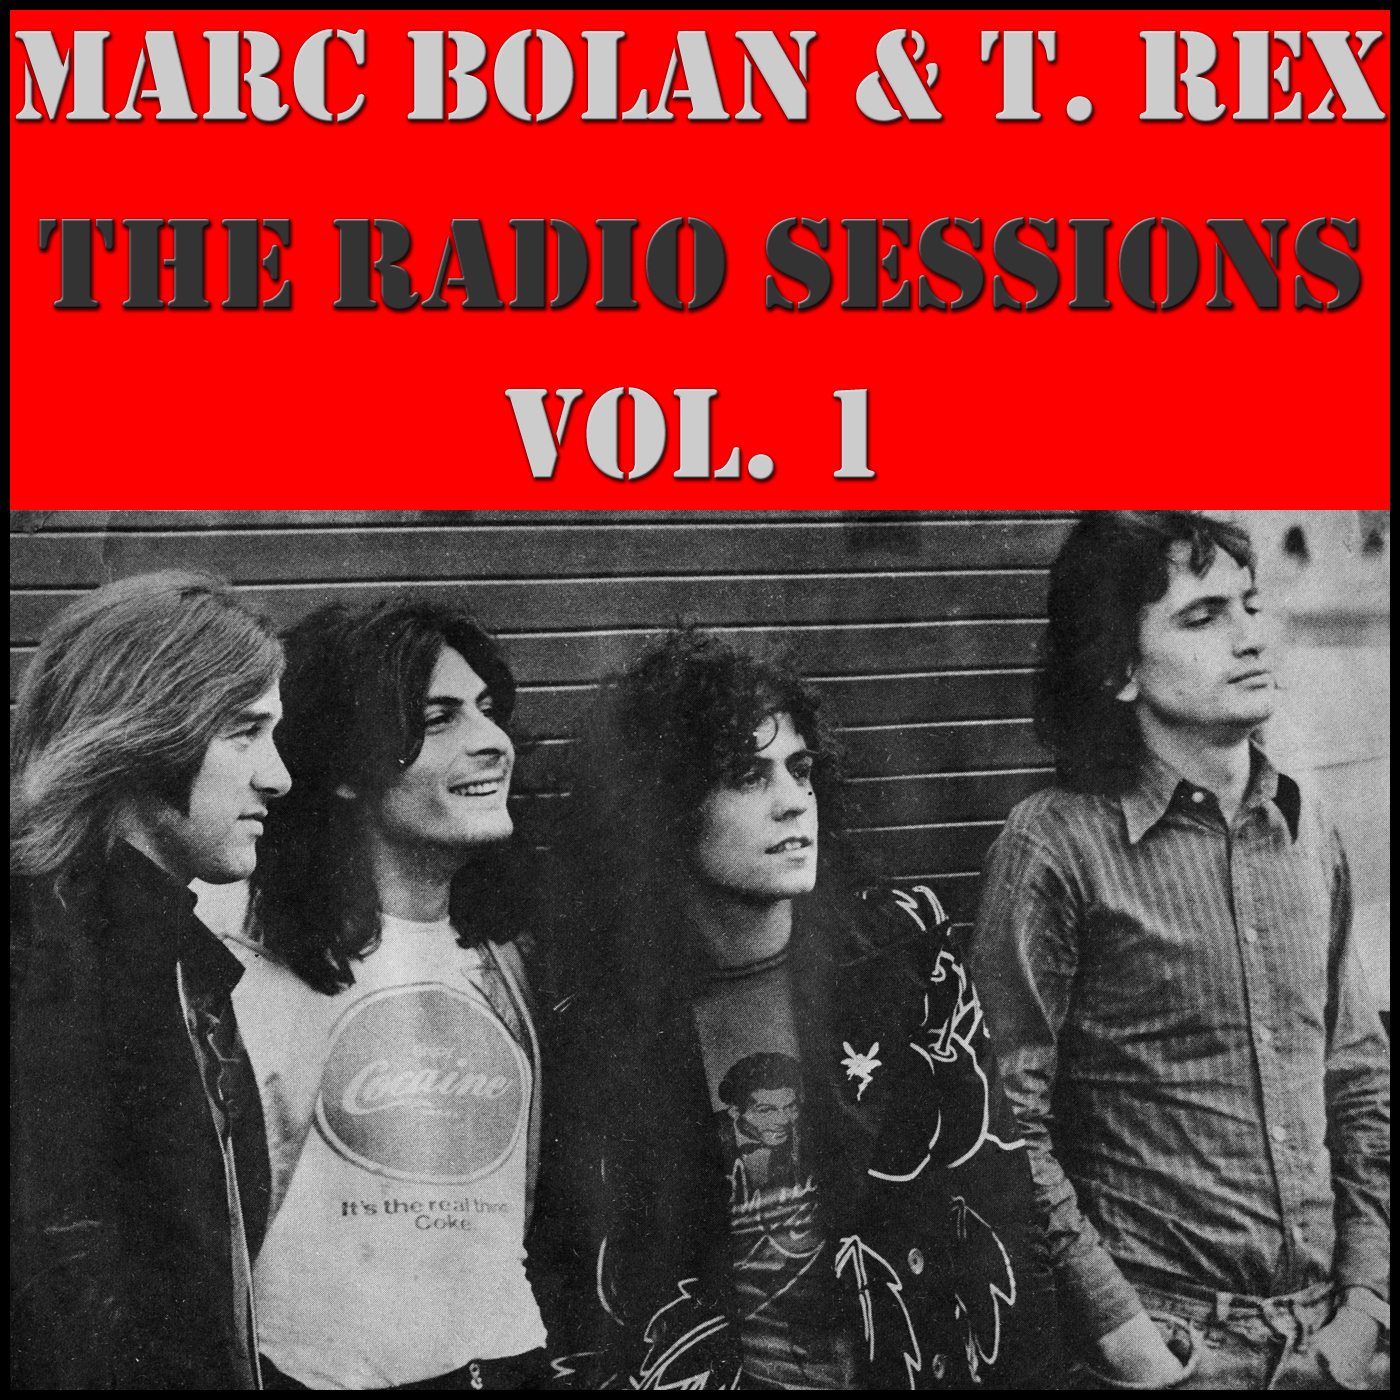 Marc Bolan & T.Rex- The Radio Sessions Vol. 1 (Live)